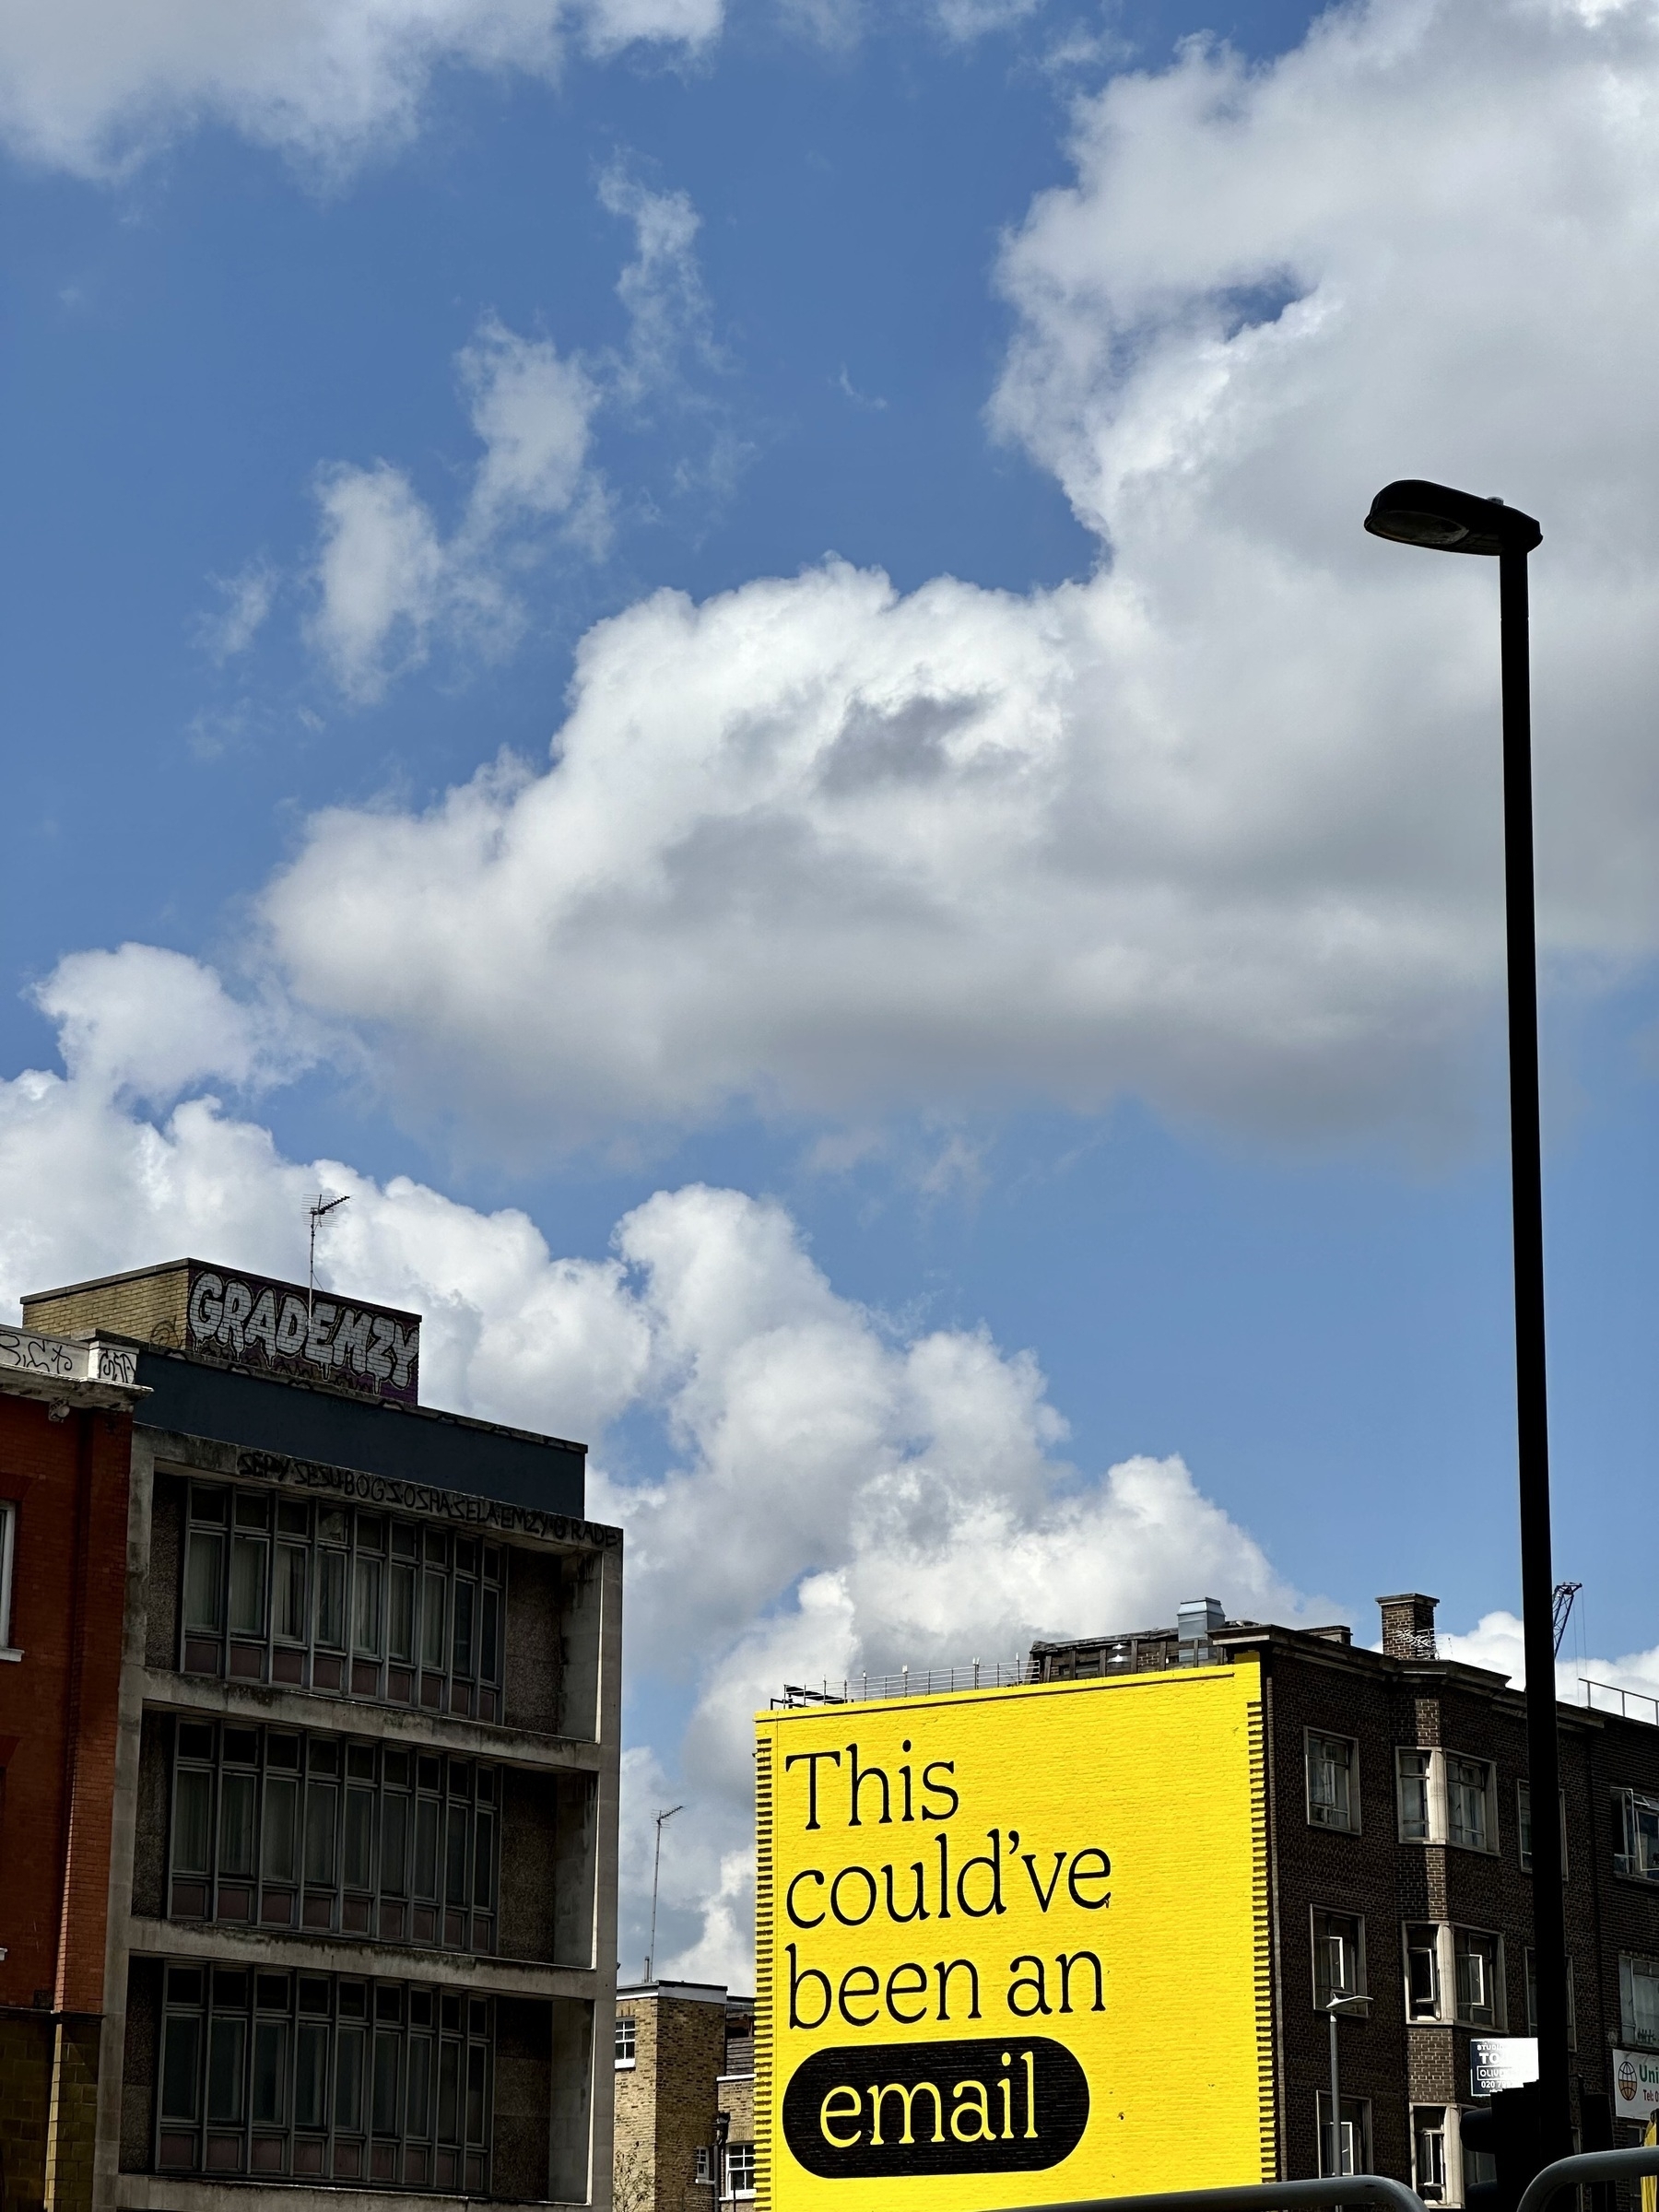 An advert on the side of a building saying “This could’ve been an email”, in black text on a bright yellow background.